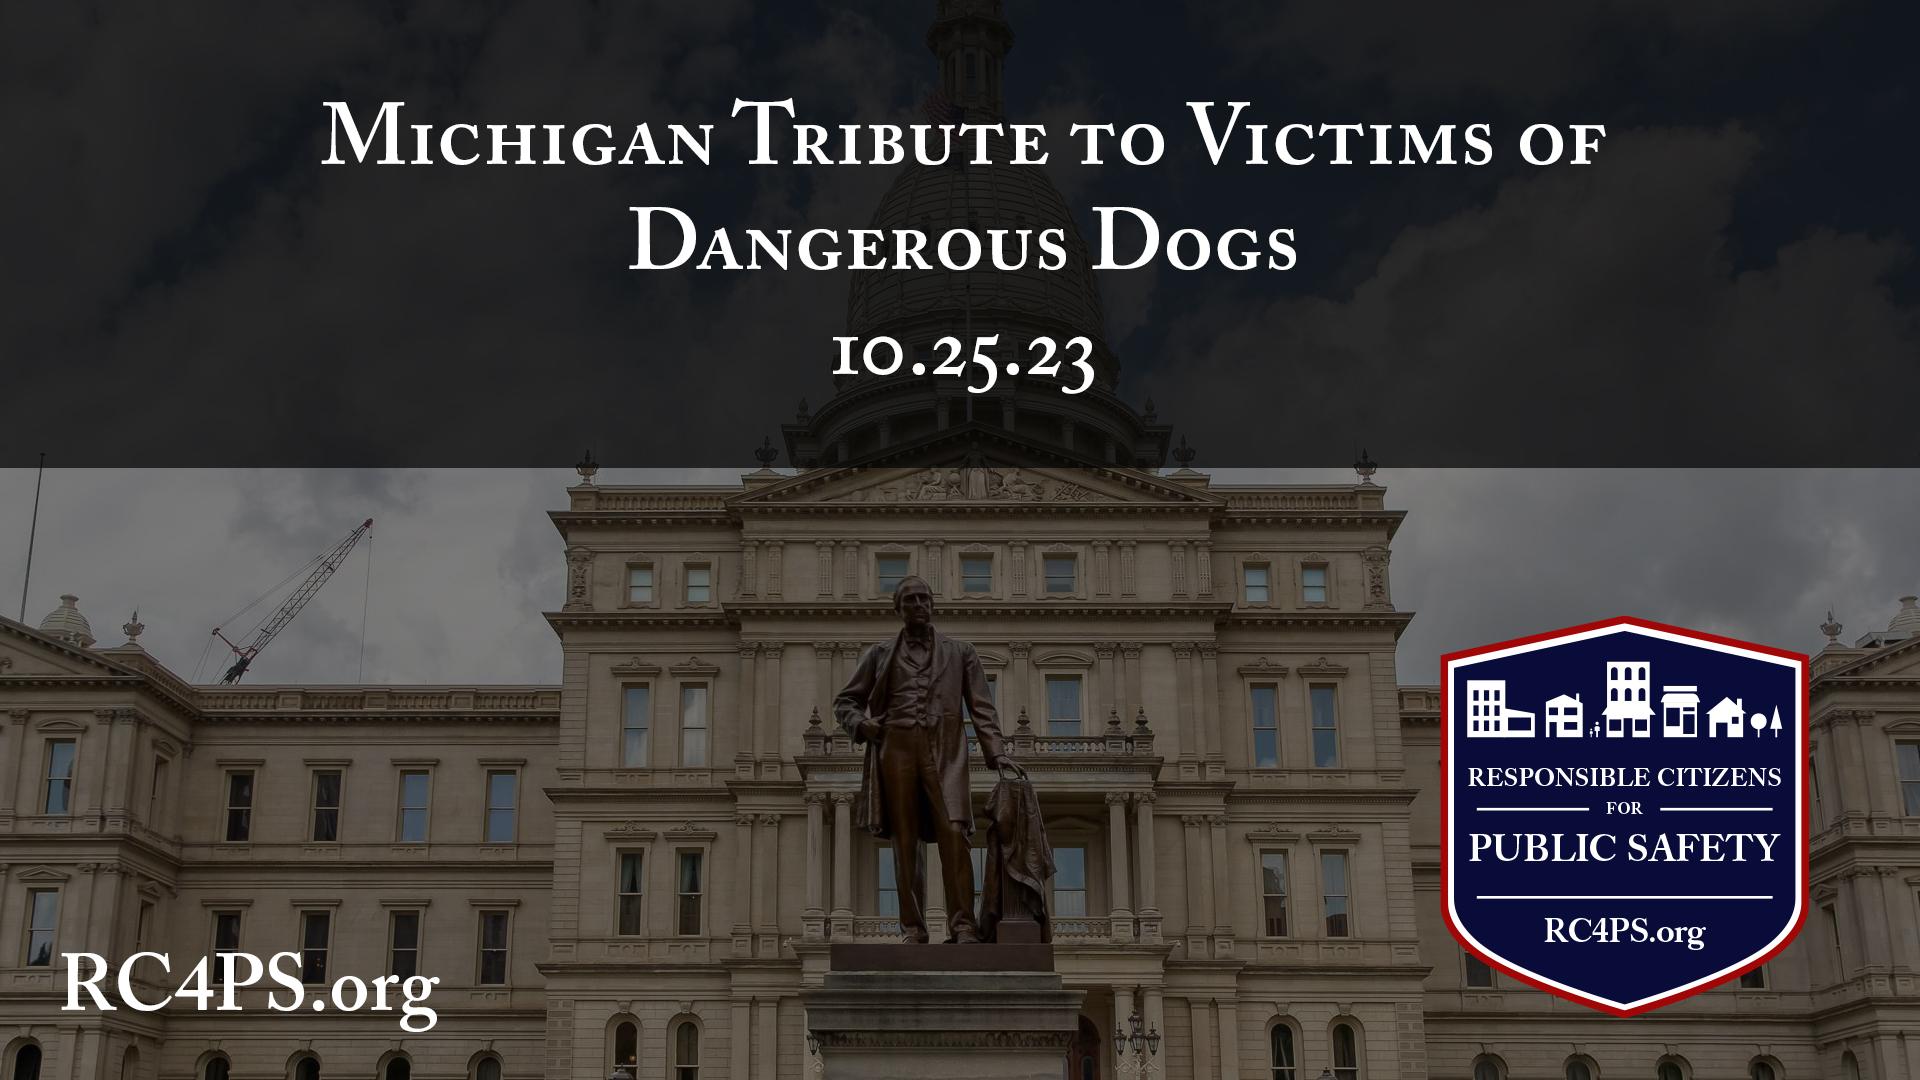 Michigan Tribute to Victims of Dangerous Dogs